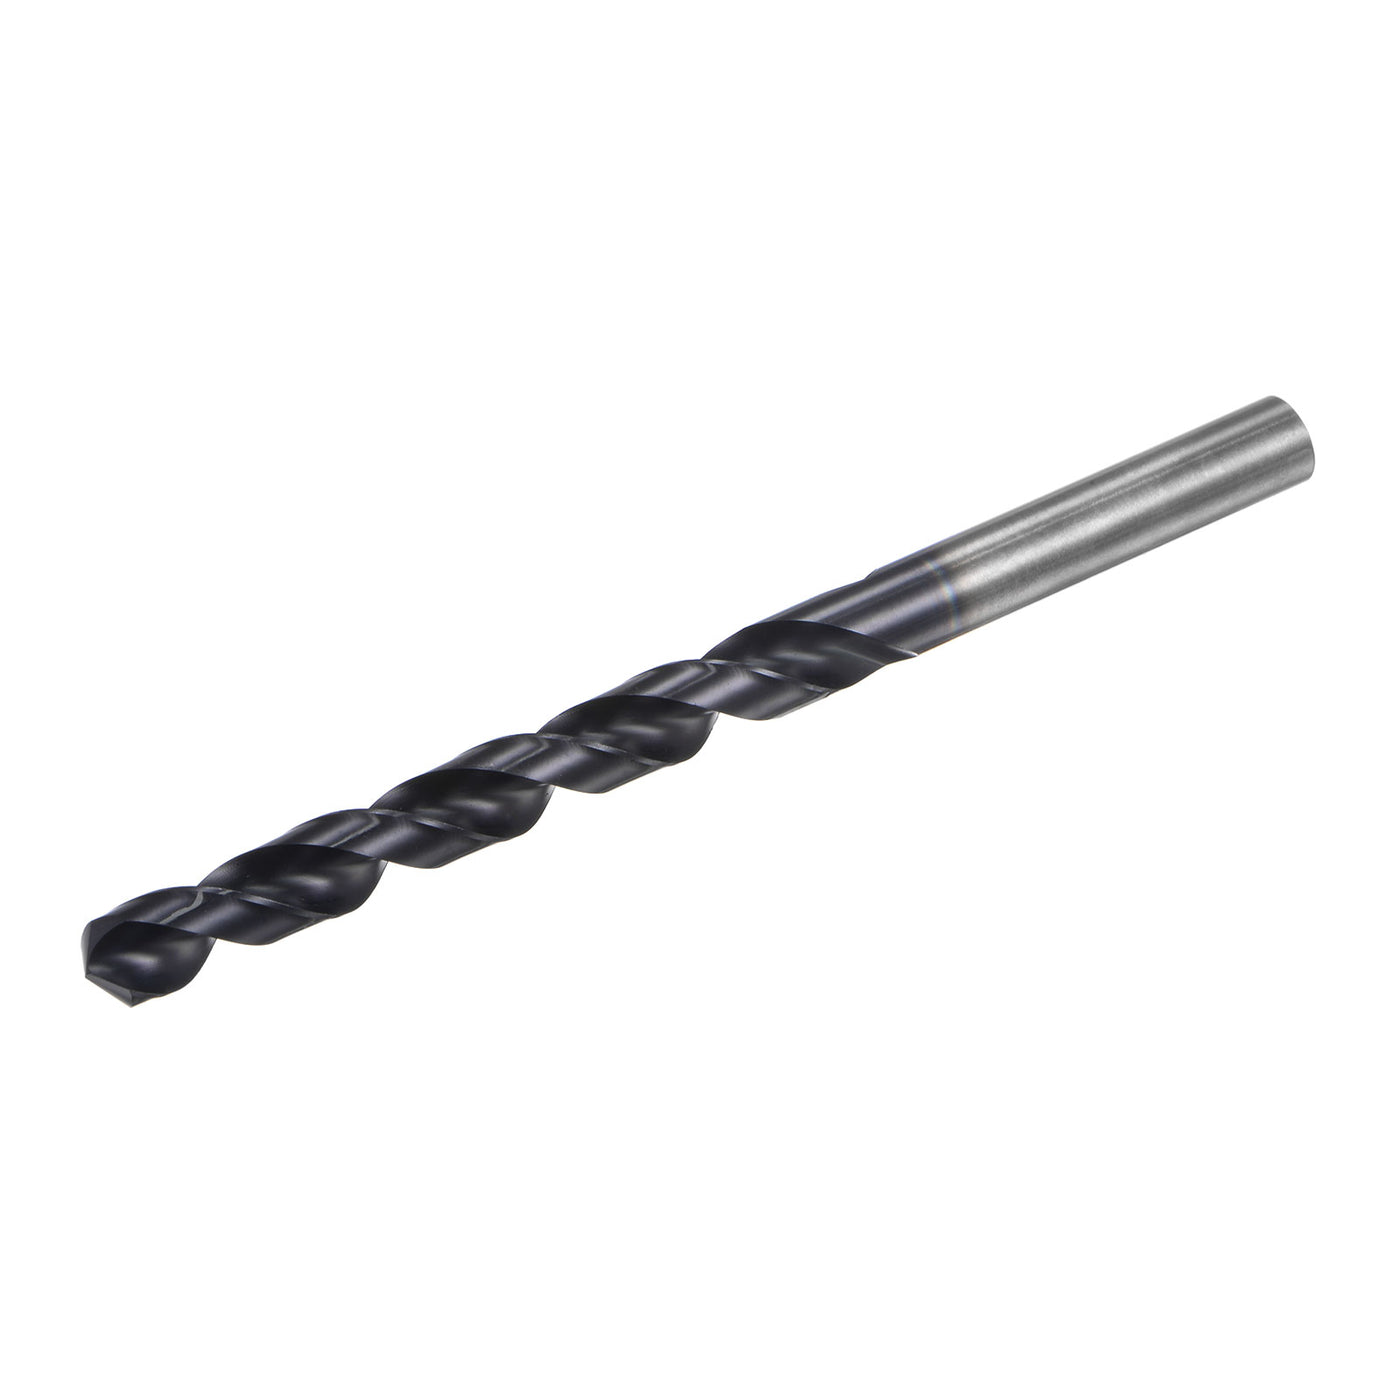 uxcell Uxcell 8.6mm M42 High Speed Steel Twist Drill Bits, TiCN Coated Round Shank Drill Bit